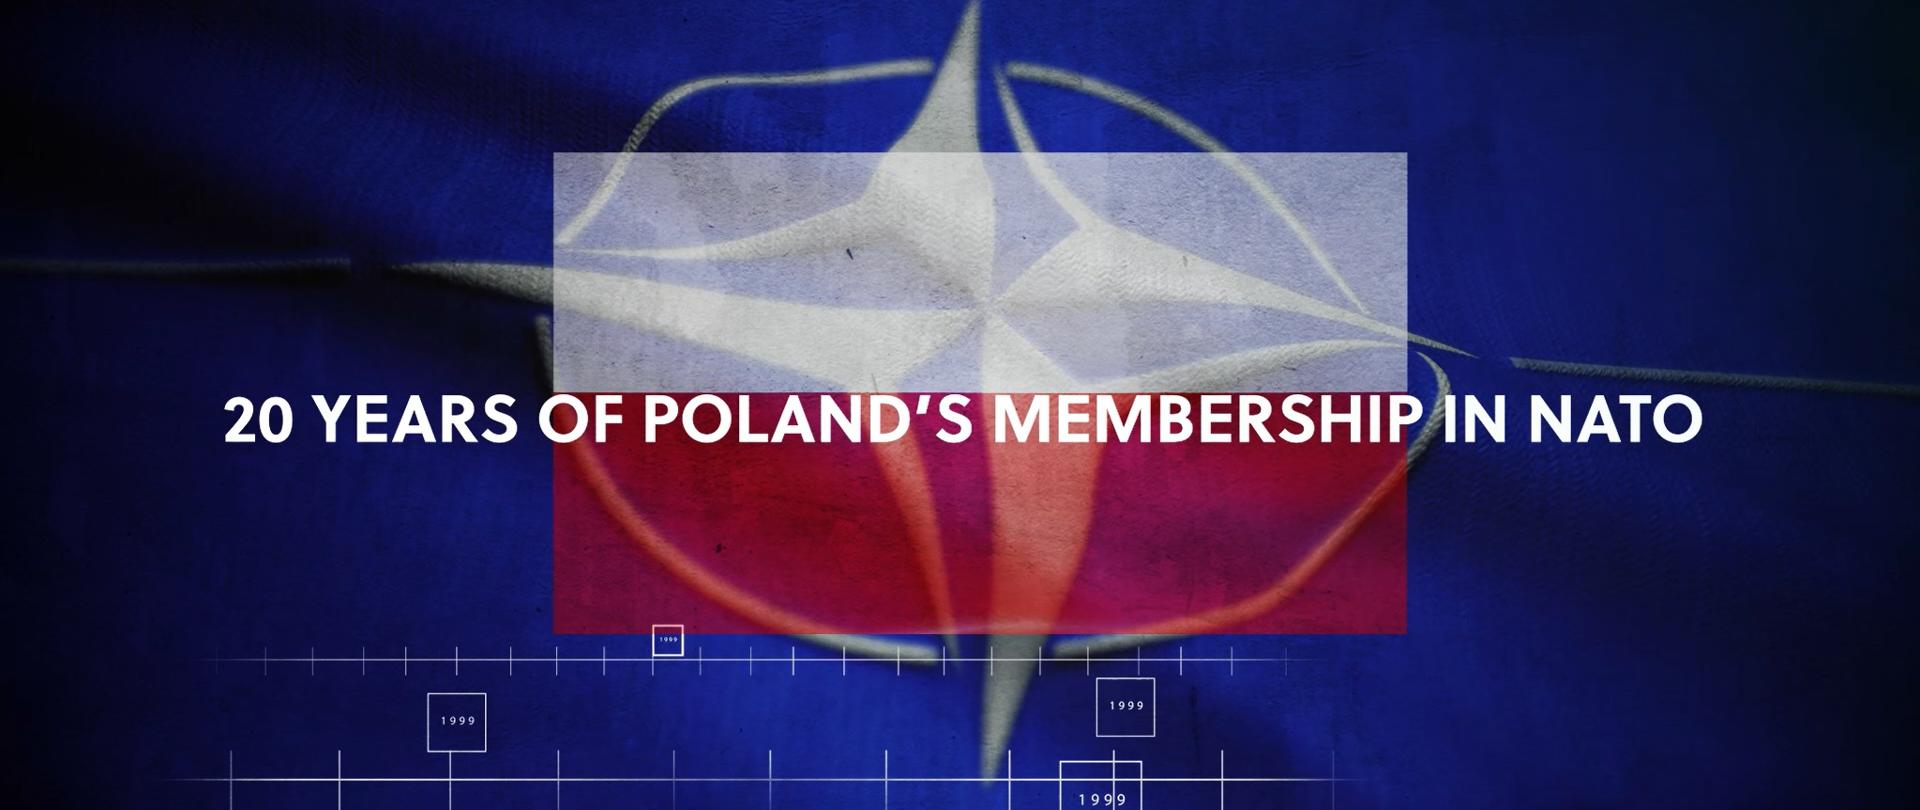 20 years of Poland in NATO